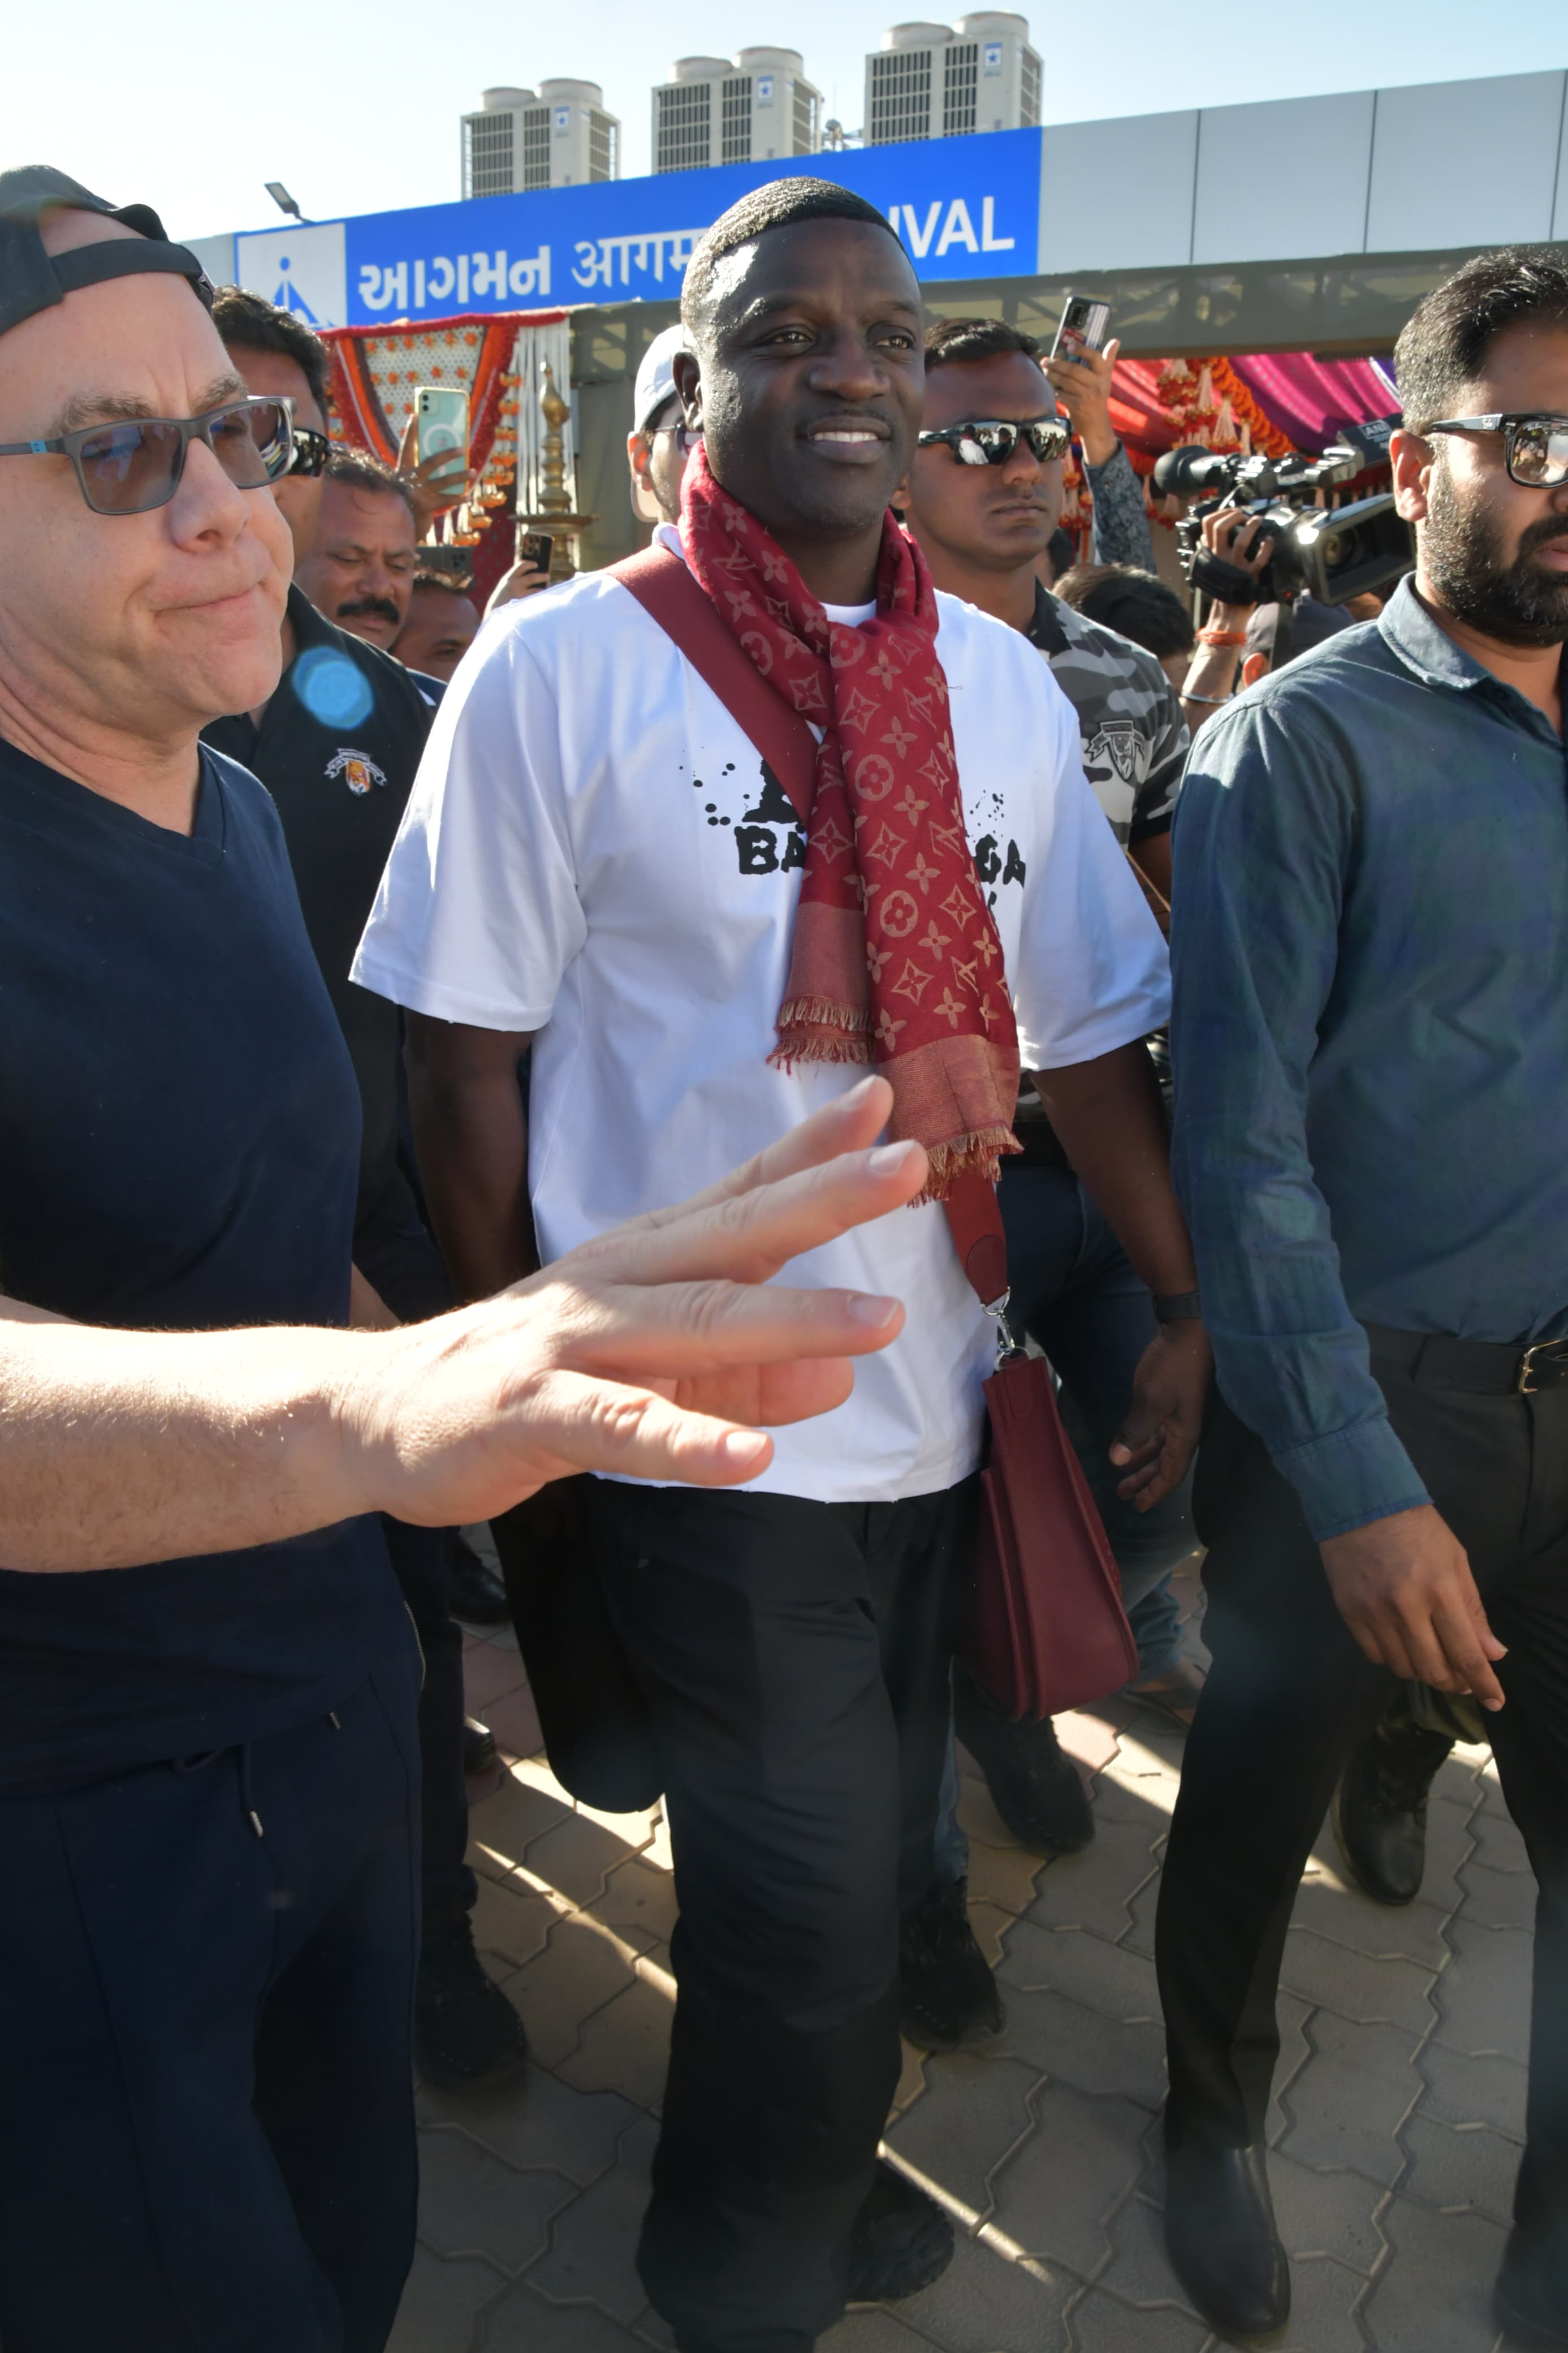 Akon also got clicked as he landed in the city